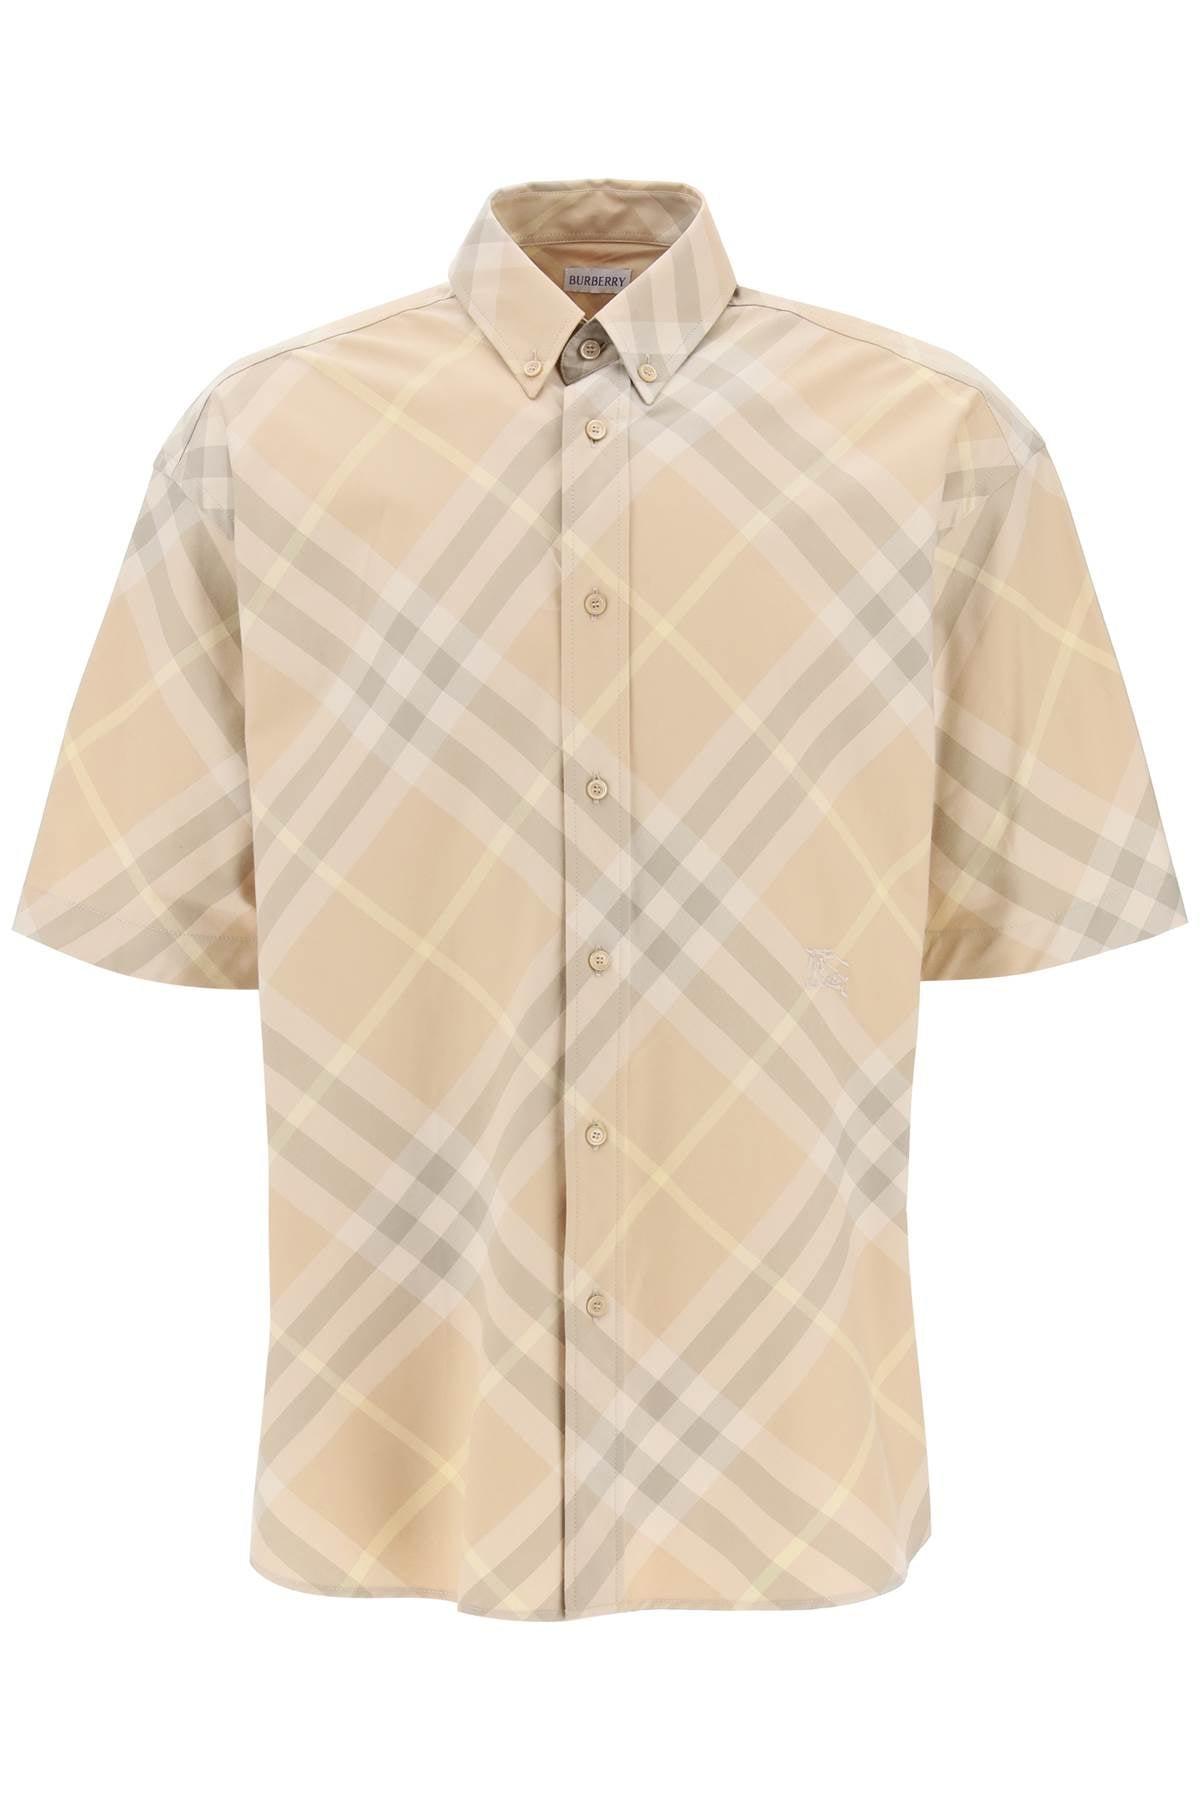 Shop Burberry Men's Oversized Check Shirt Made With 100% Organic Cotton In Multicolor